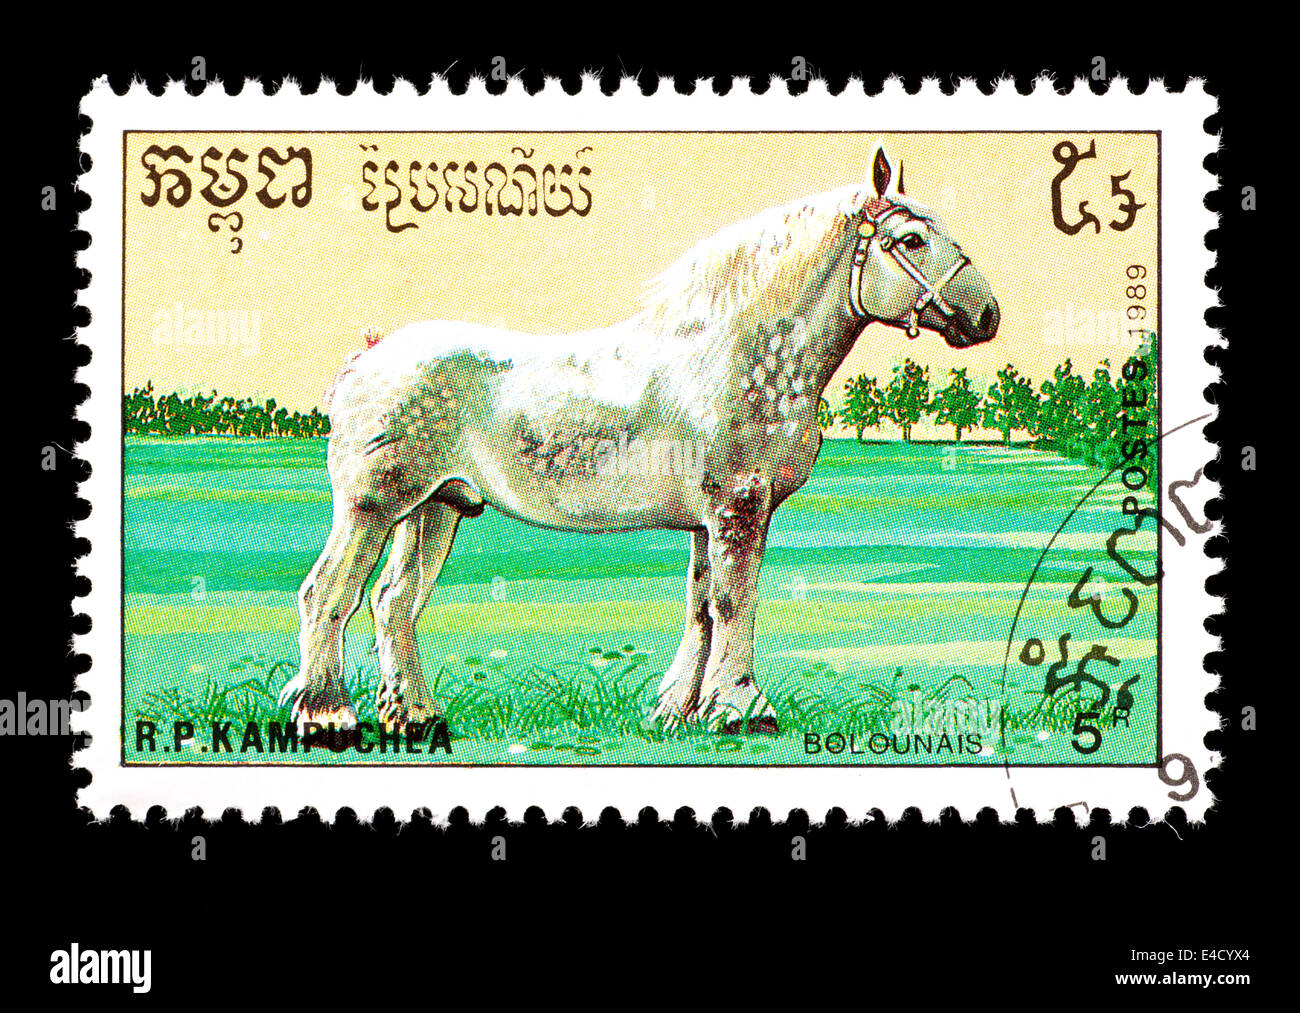 Postage stamp from Cambodia (Kampuchea) depicting a Bolounais draft horse. Stock Photo